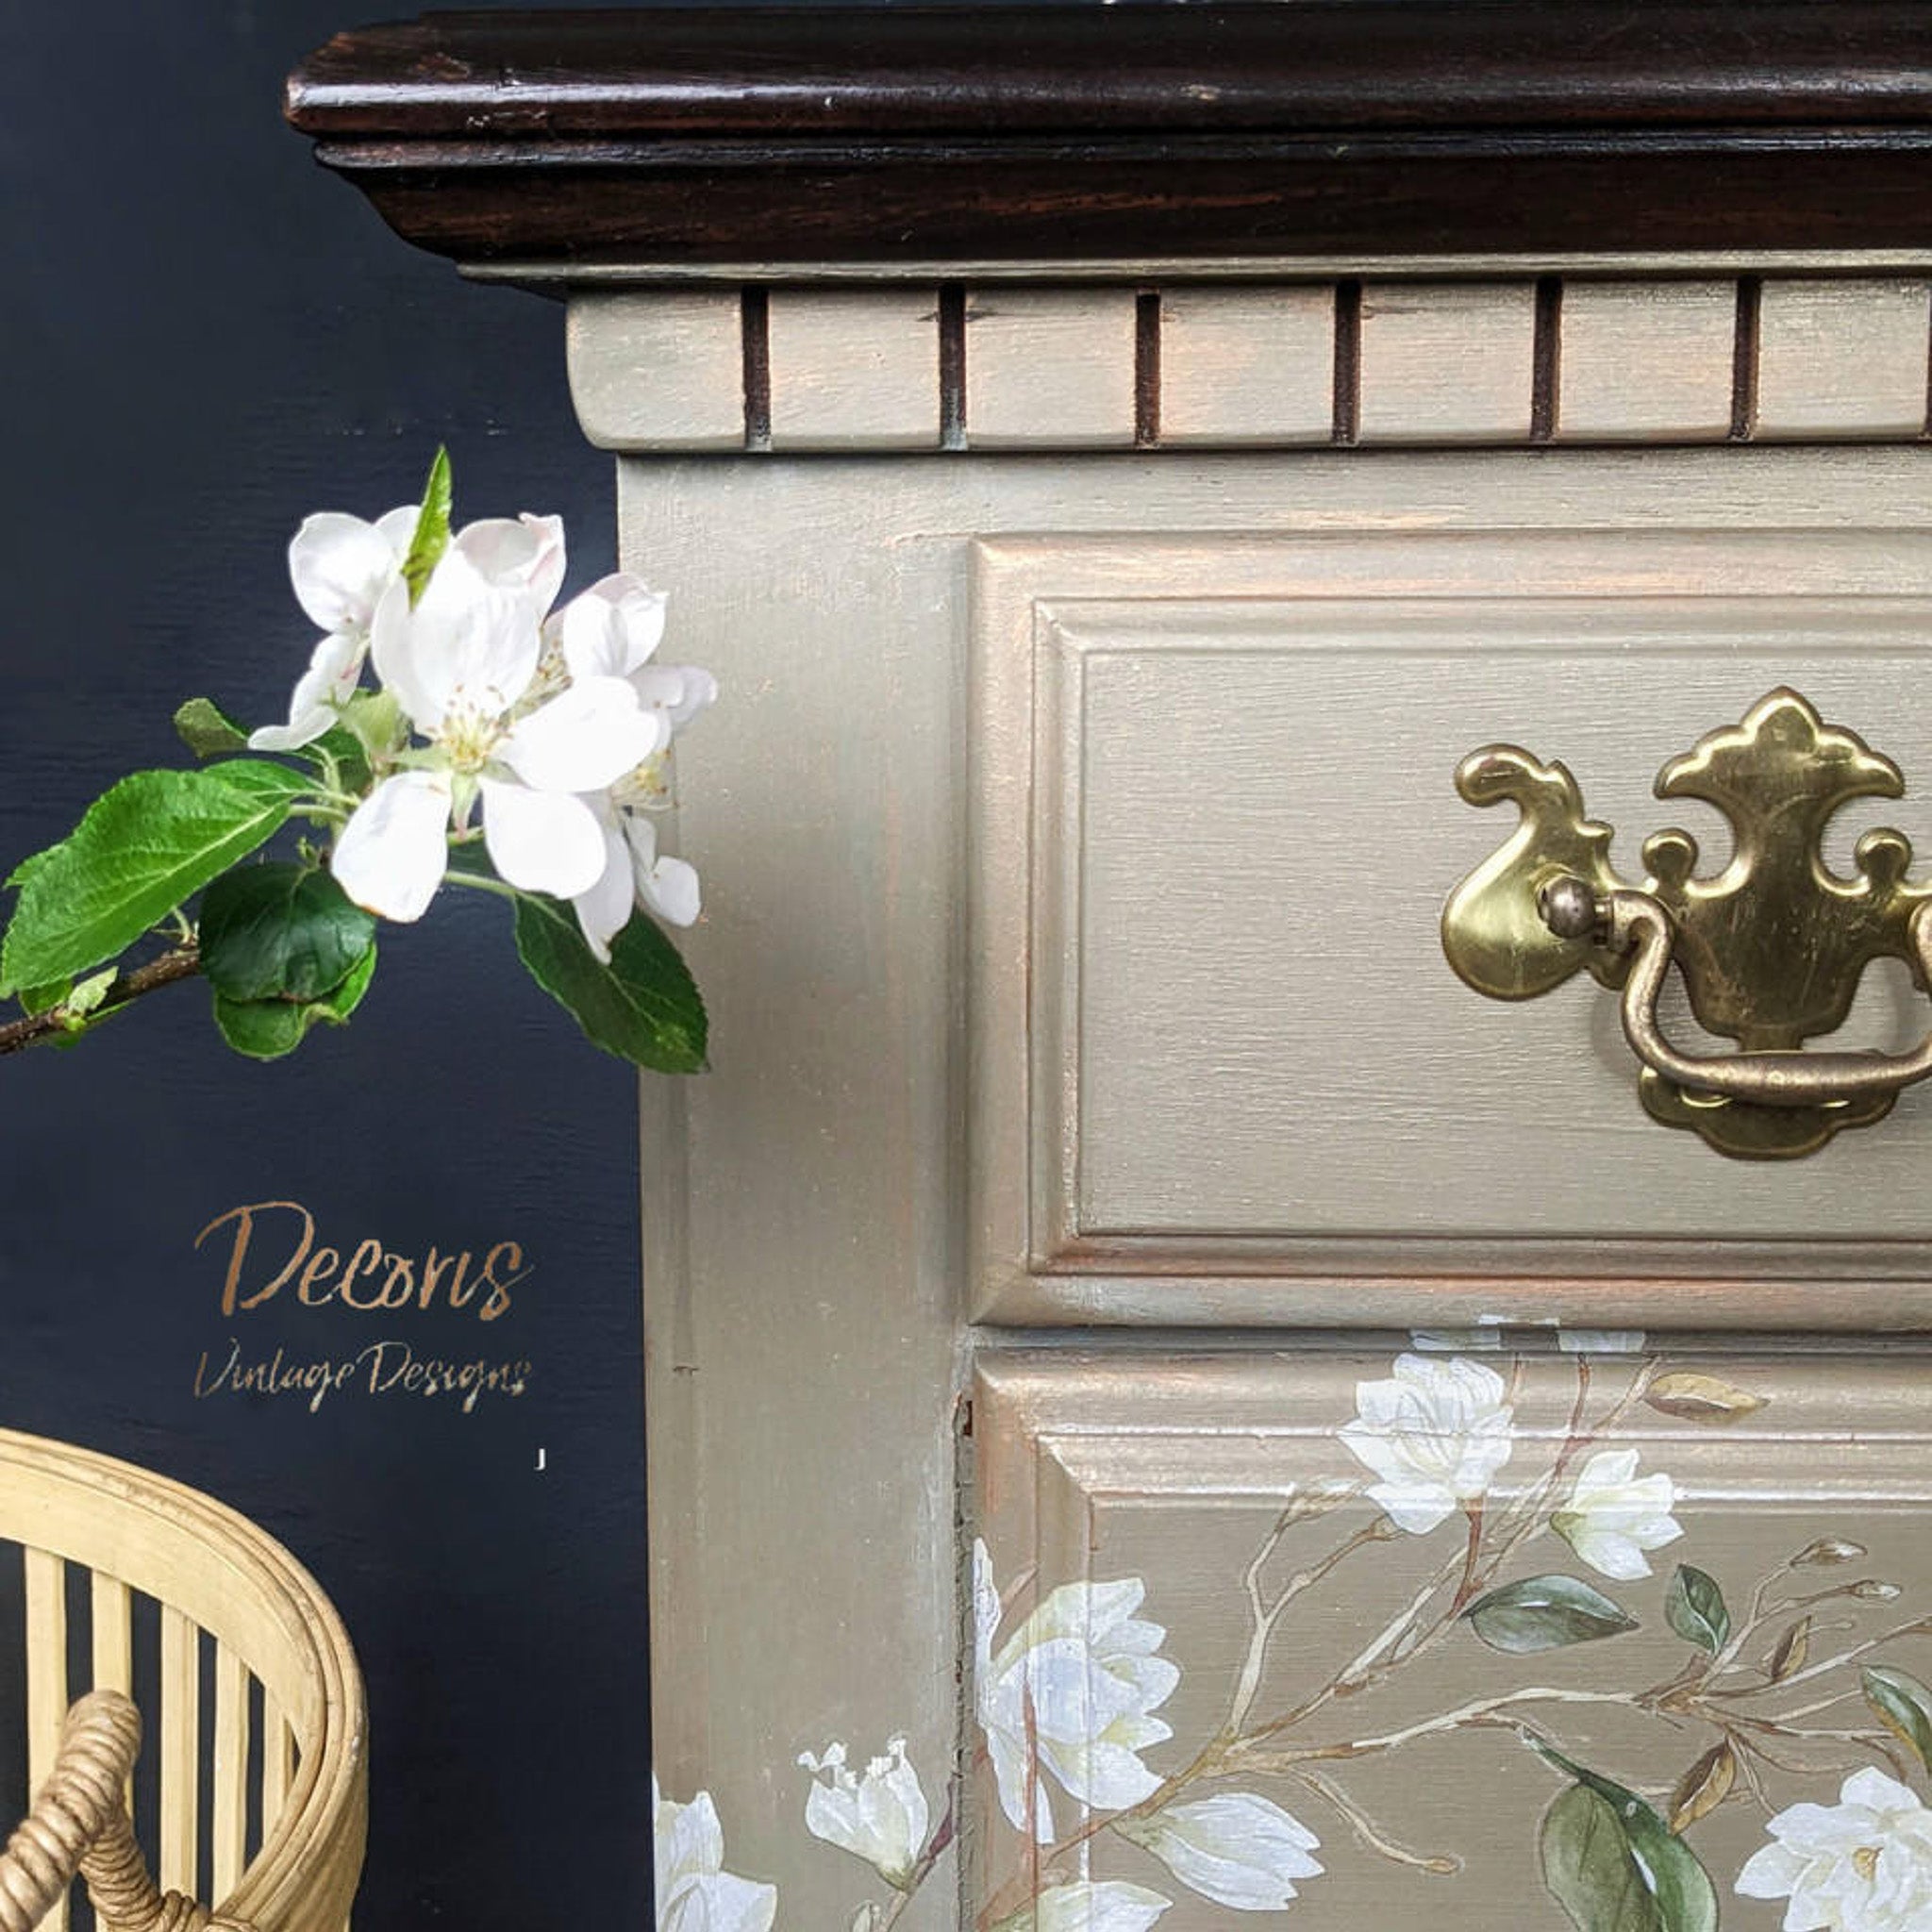 A close-up view of a vintage dresser refurbished by Decoris Vintage Designs is painted beige and features Dixie Belle Paint's Copper Bronze Glaze to accent corners and recessed areas.